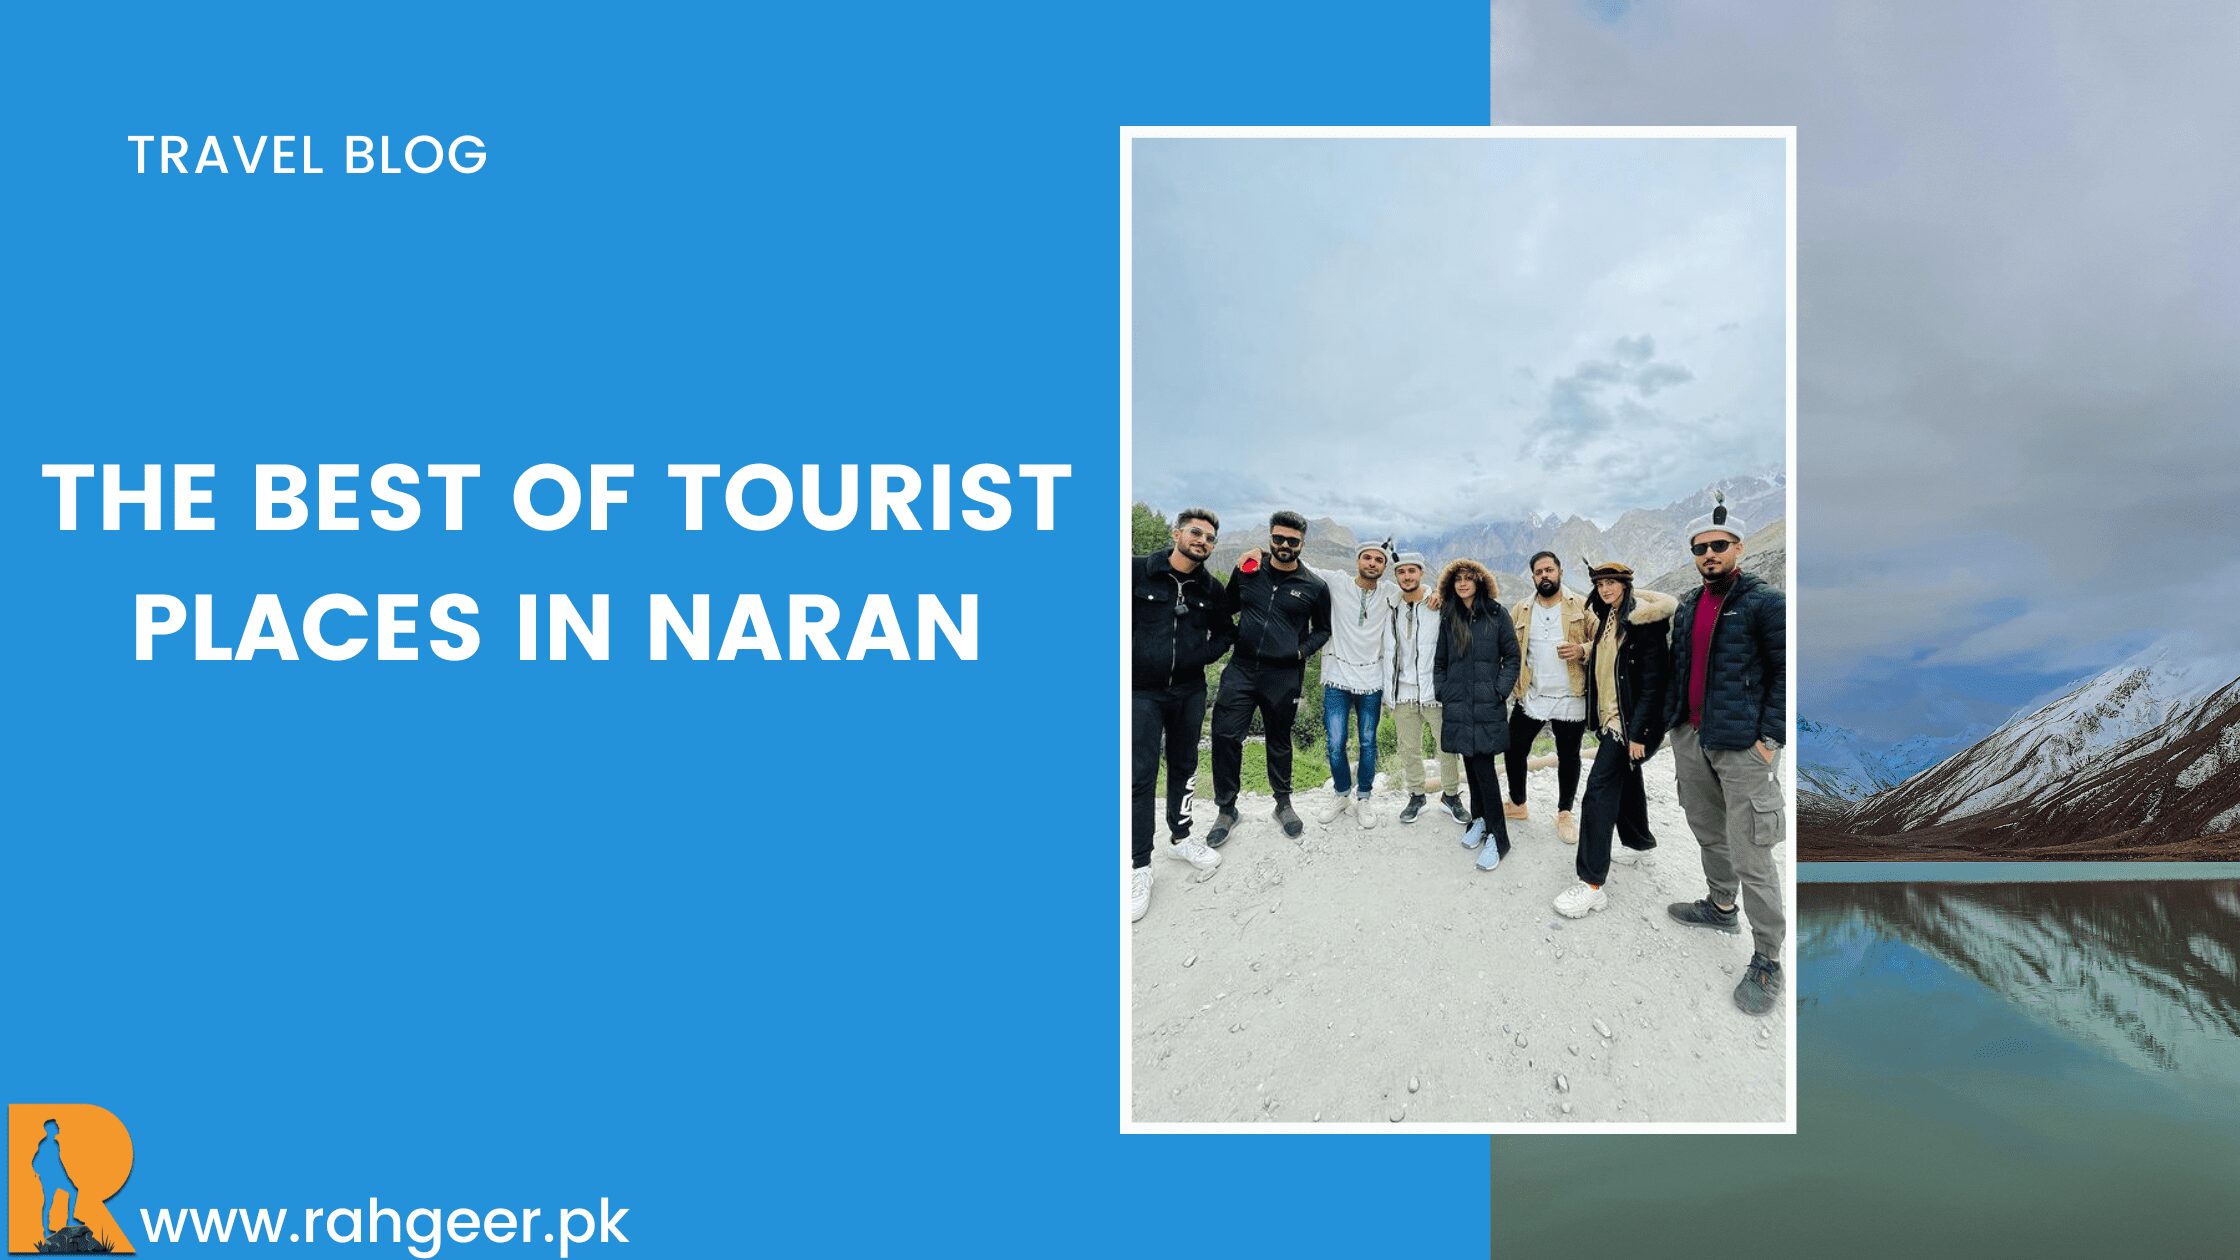 Top 8 Famous Tourist Places to visit in Naran Valley of Pakistan